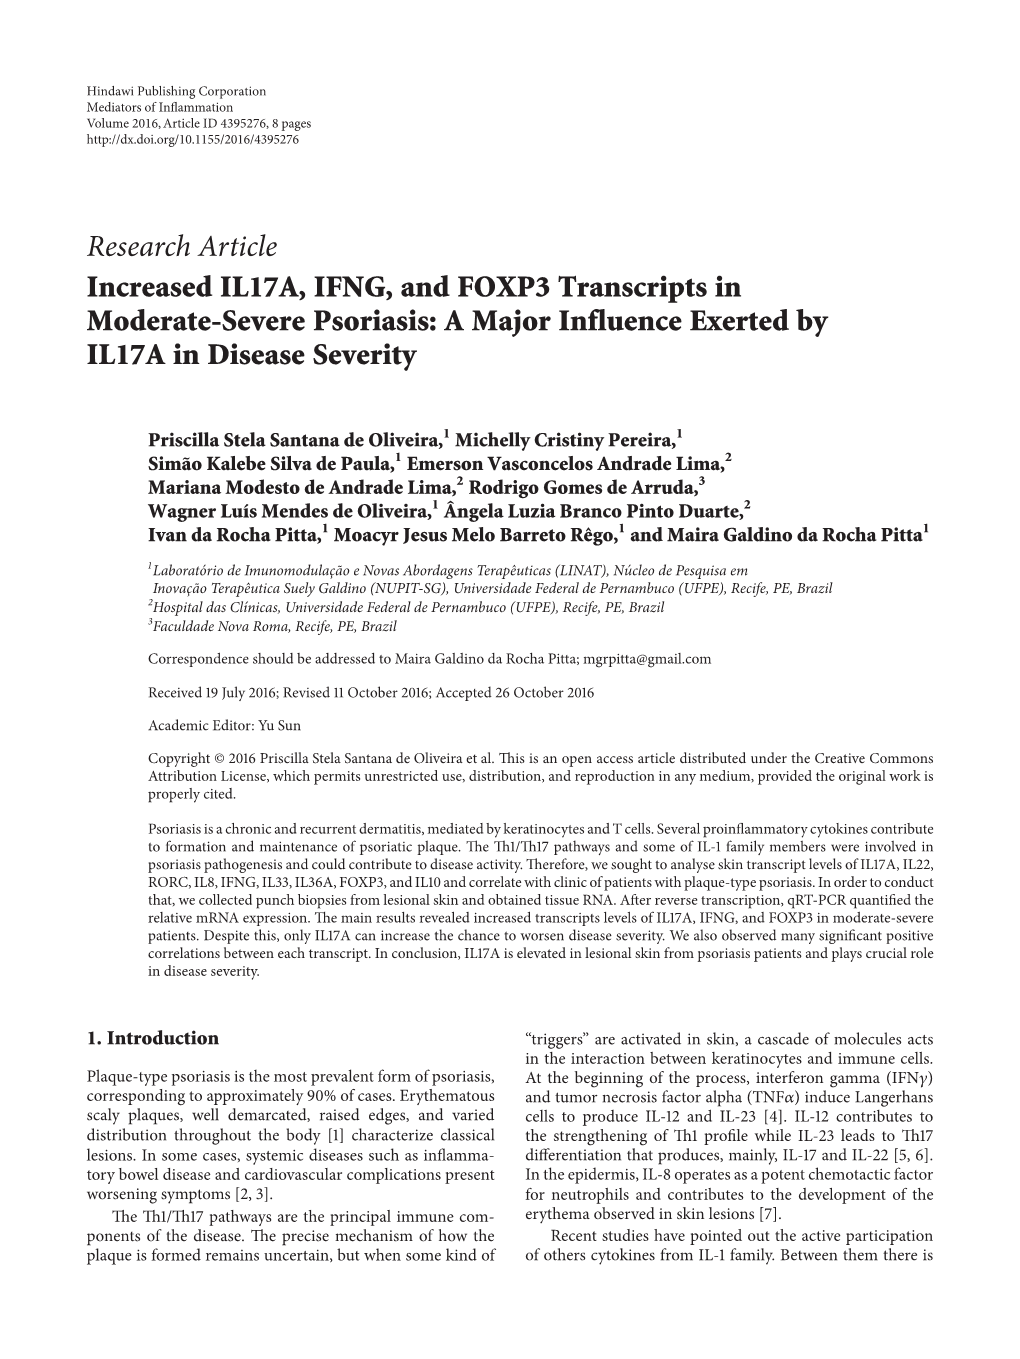 Research Article Increased IL17A, IFNG, and FOXP3 Transcripts in Moderate-Severe Psoriasis: a Major Influence Exerted by IL17A in Disease Severity